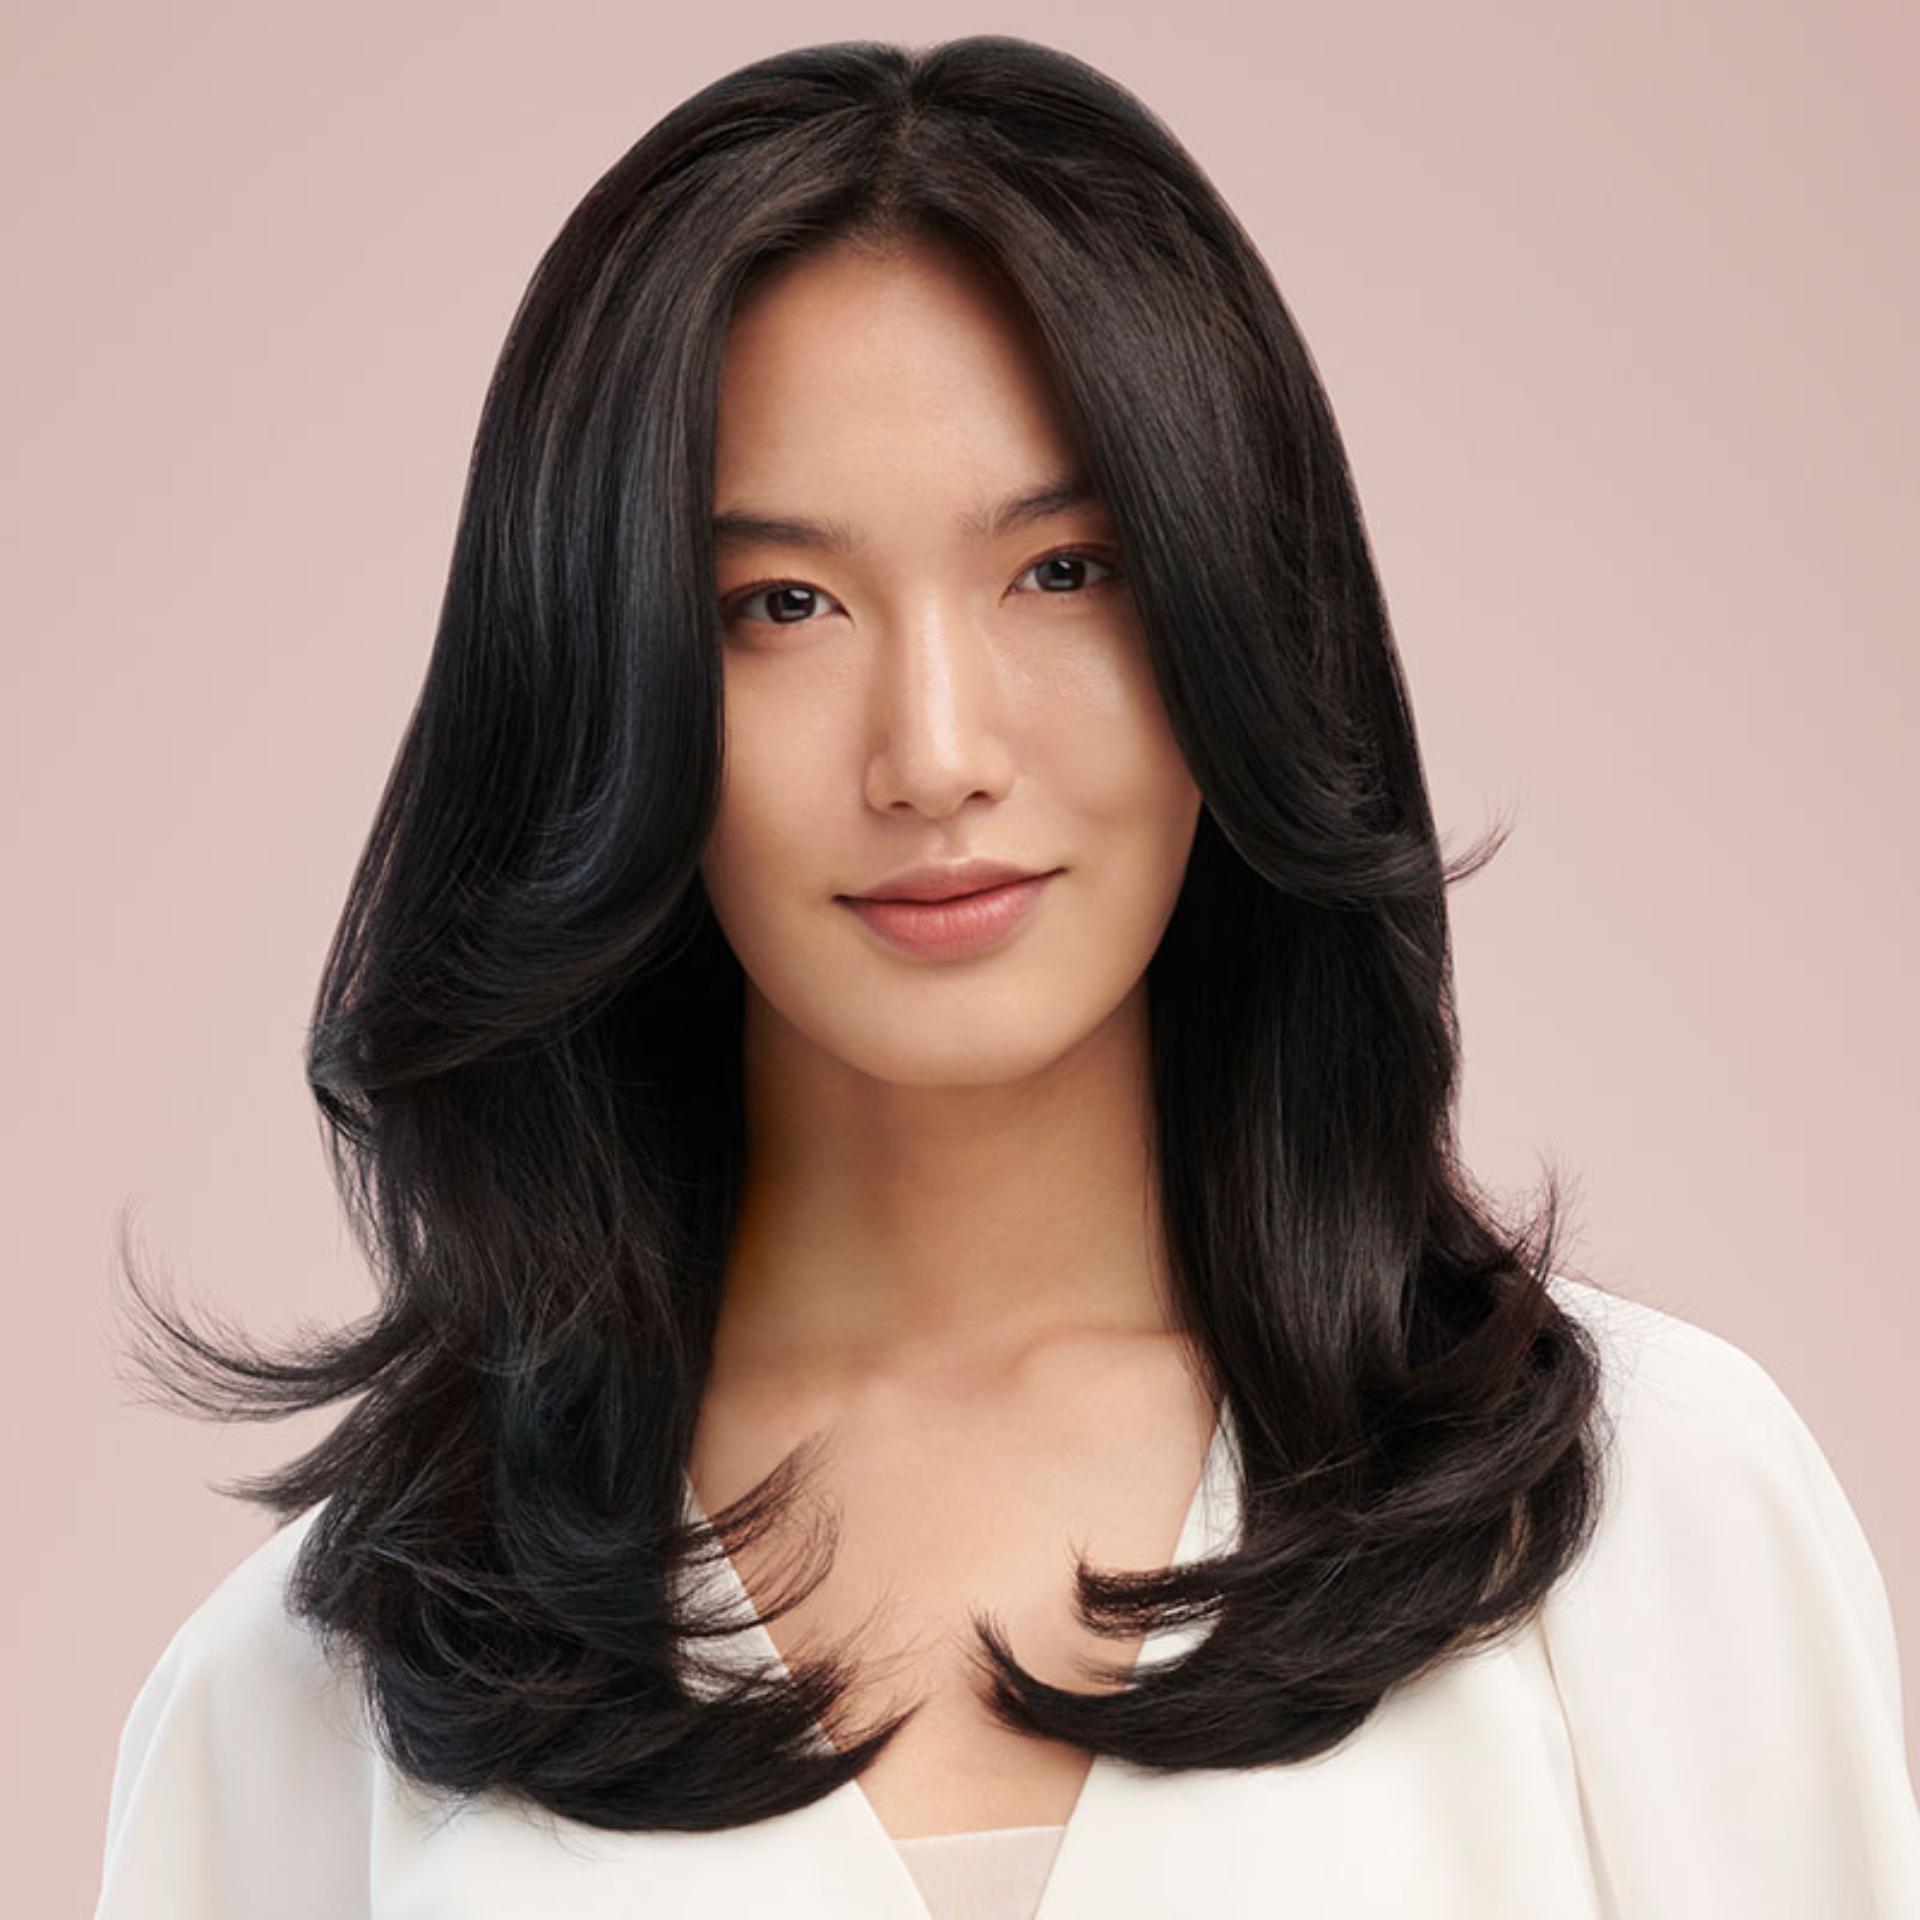 Model with smooth c-curls using the Dyson Airwrap multi-styler